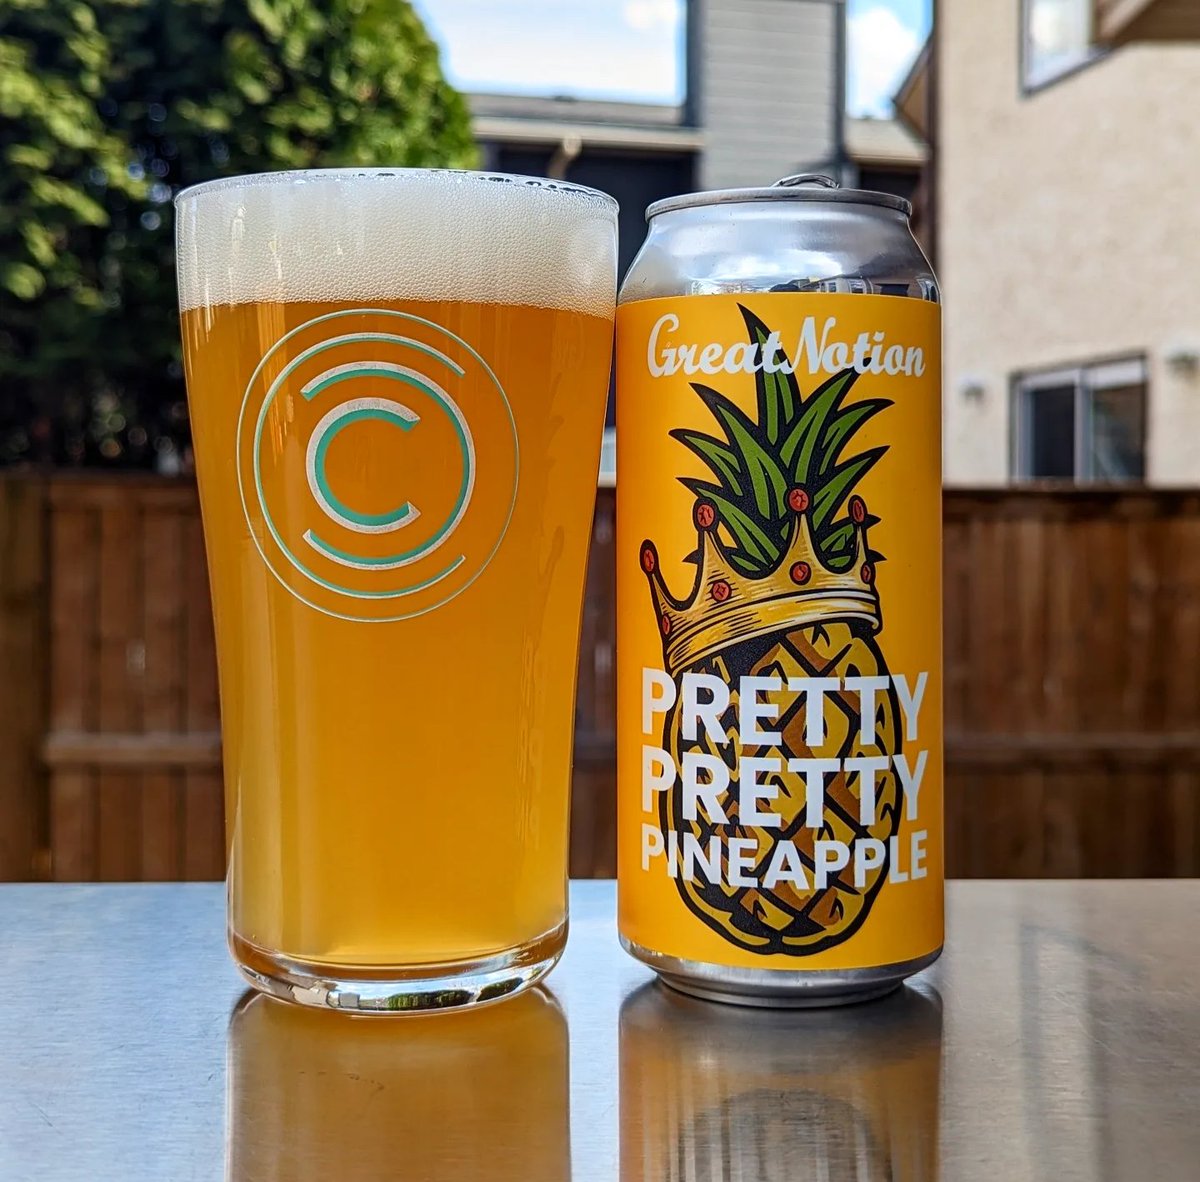 It's a gorgeous Friday night. The perfect night for this amazingly delicious Tart Ale from @GreatNotionPDX. Pretty Pretty Pineapple is pretty damn good! The pineapple aromas and sweet tartness are perfect. 🍺🍍🤤
.
.
#beer #beerporn